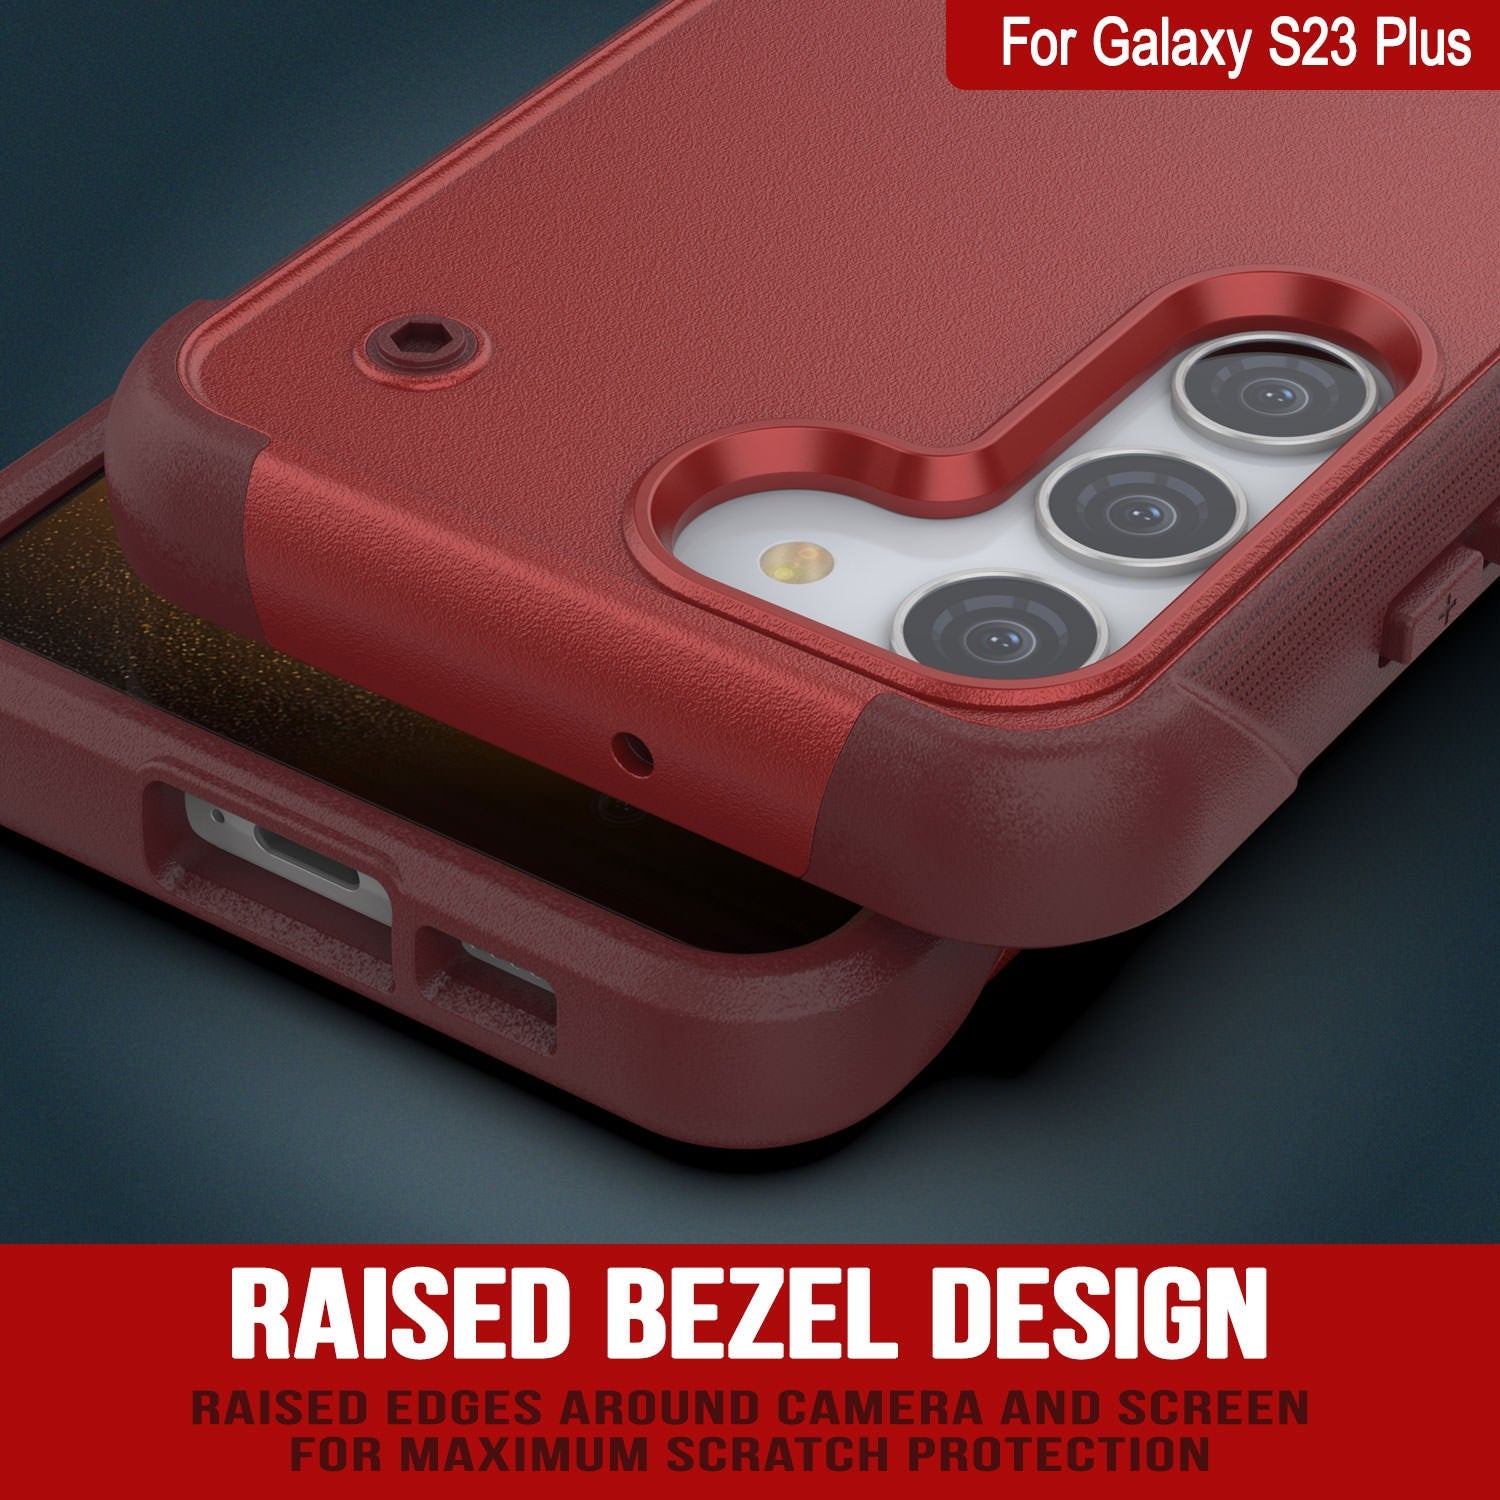 Punkcase Galaxy S24+ Plus Case [Reliance Series] Protective Hybrid Military Grade Cover W/Built-in Kickstand [Red-Rose]